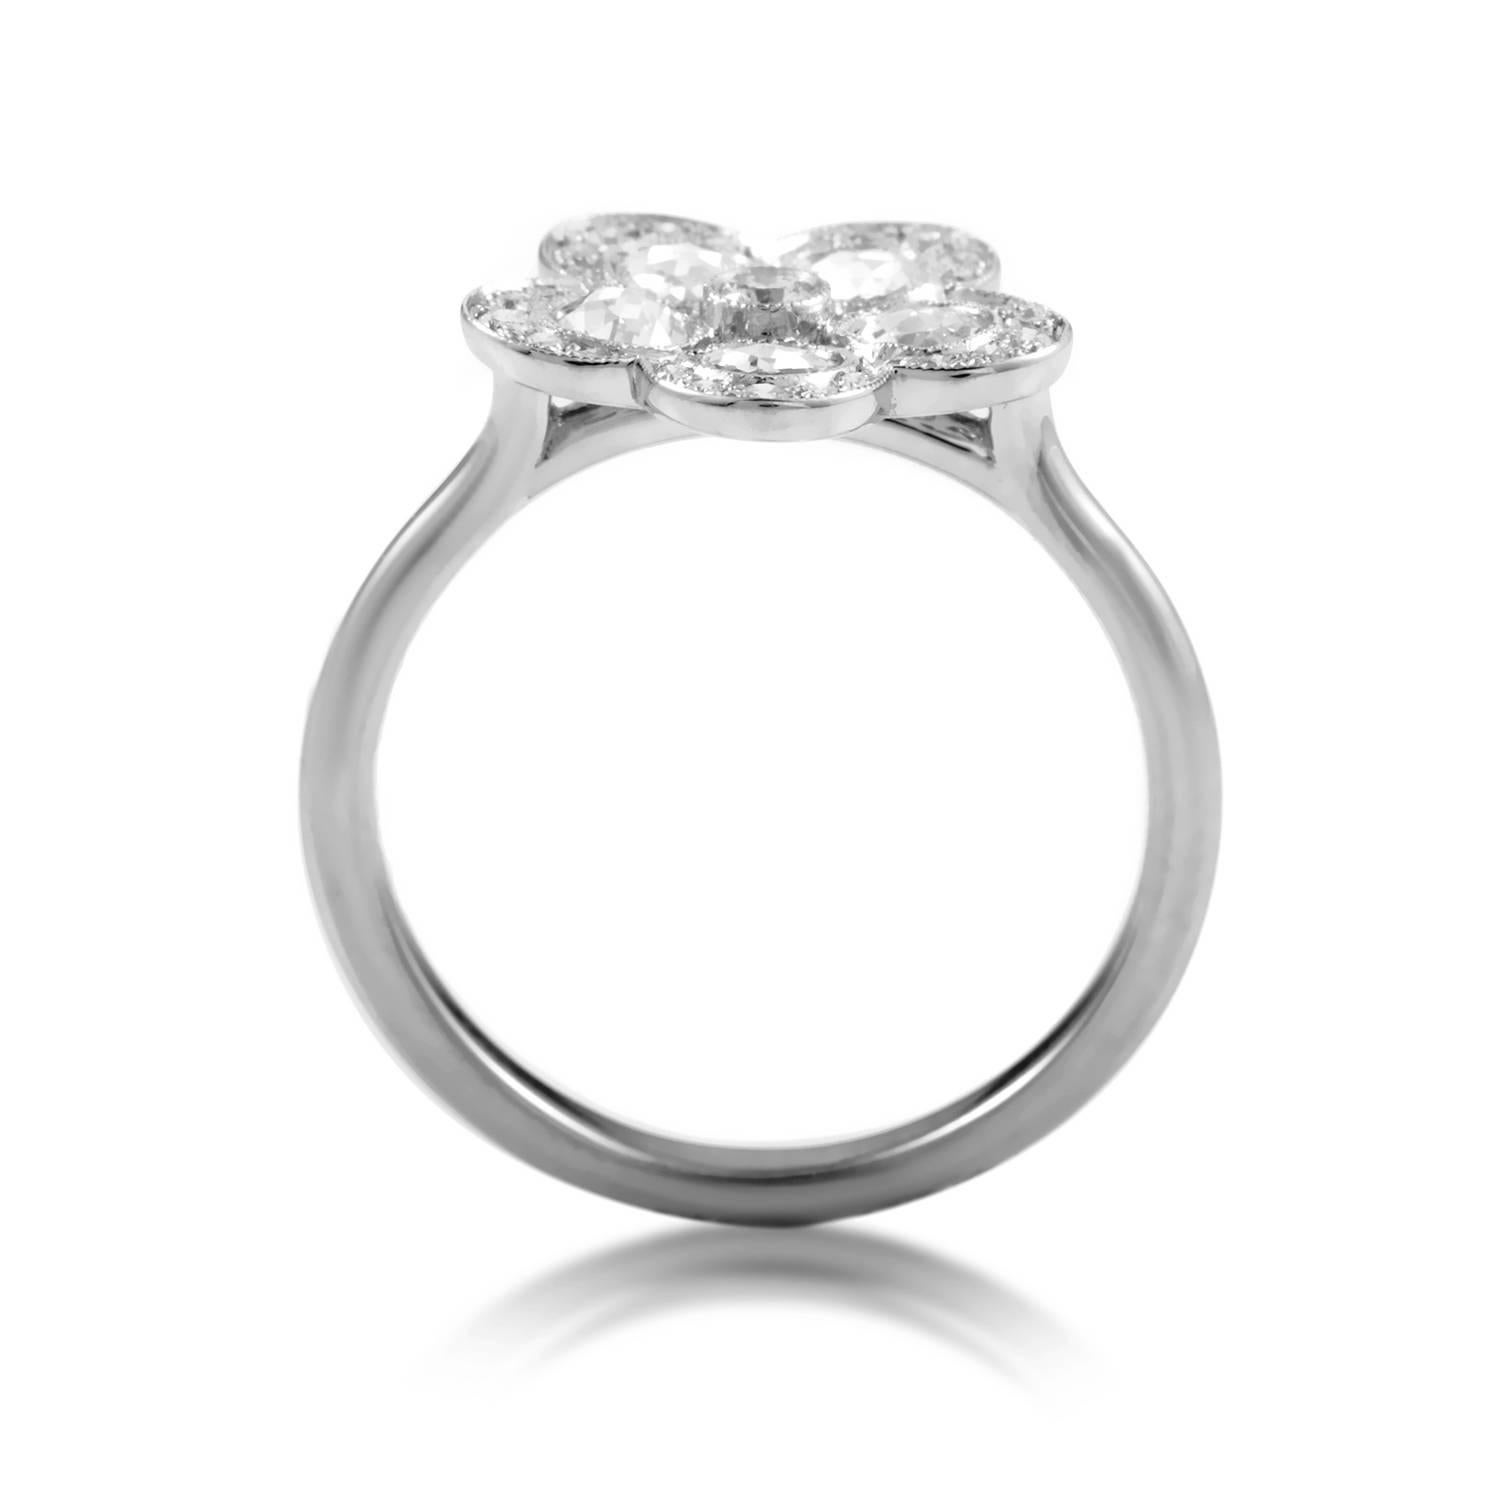 The impressive and alluring depth of the amazing rose-cut diamonds totaling 0.75ct and their eye-catching luxurious glisten grace this gorgeous ring from Tiffany & Co. with exceptional aesthetic value, while the luxurious platinum is impeccably